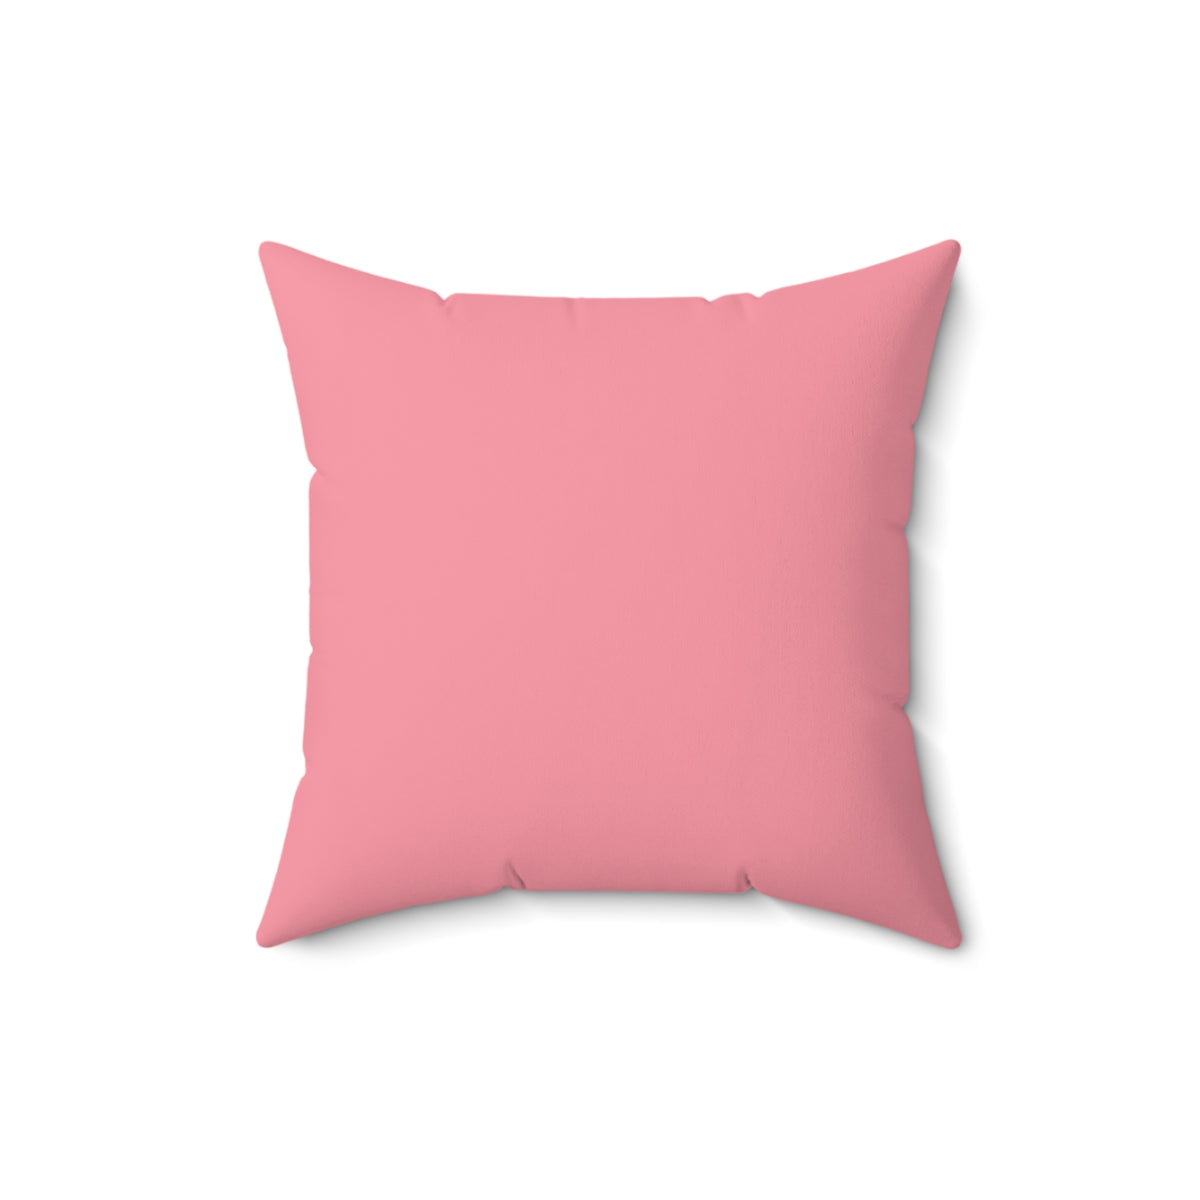 Retro Pink Ornaments Christmas Pillow | Beautiful Christmas Home Decor | Christmas Gift For Her | Faux Suede Square Pillow